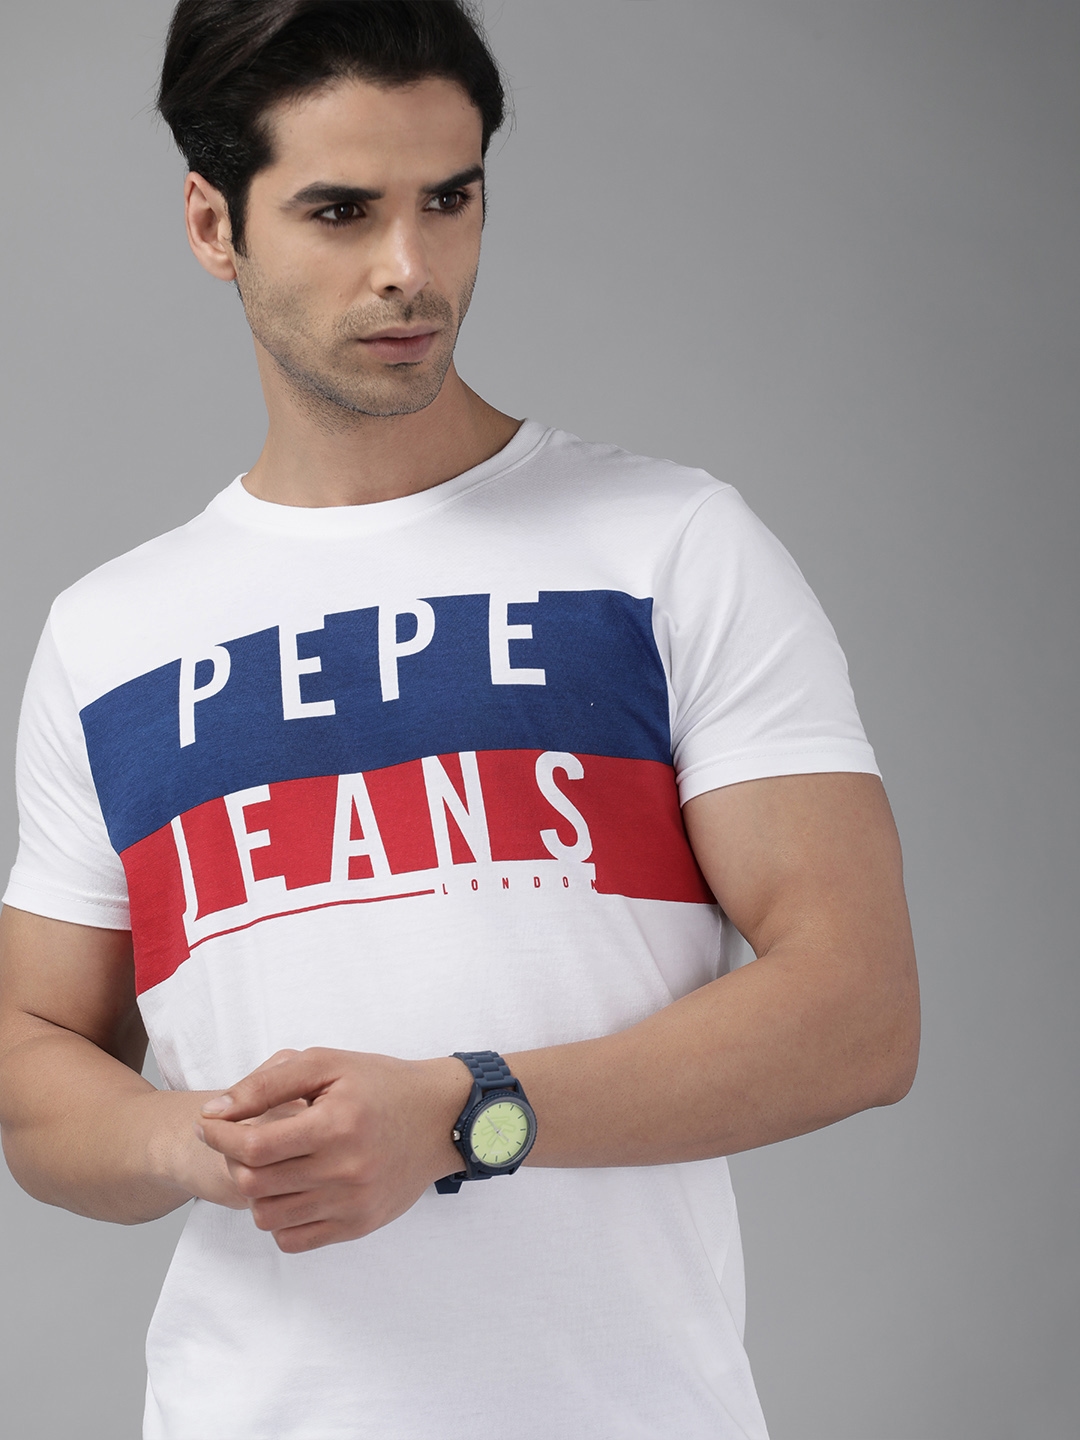 Printed | Buy Pepe Jeans 18934850 Cotton for White T Men Casual Tshirts Slim - Pure Myntra Fit Men Typography Shirt